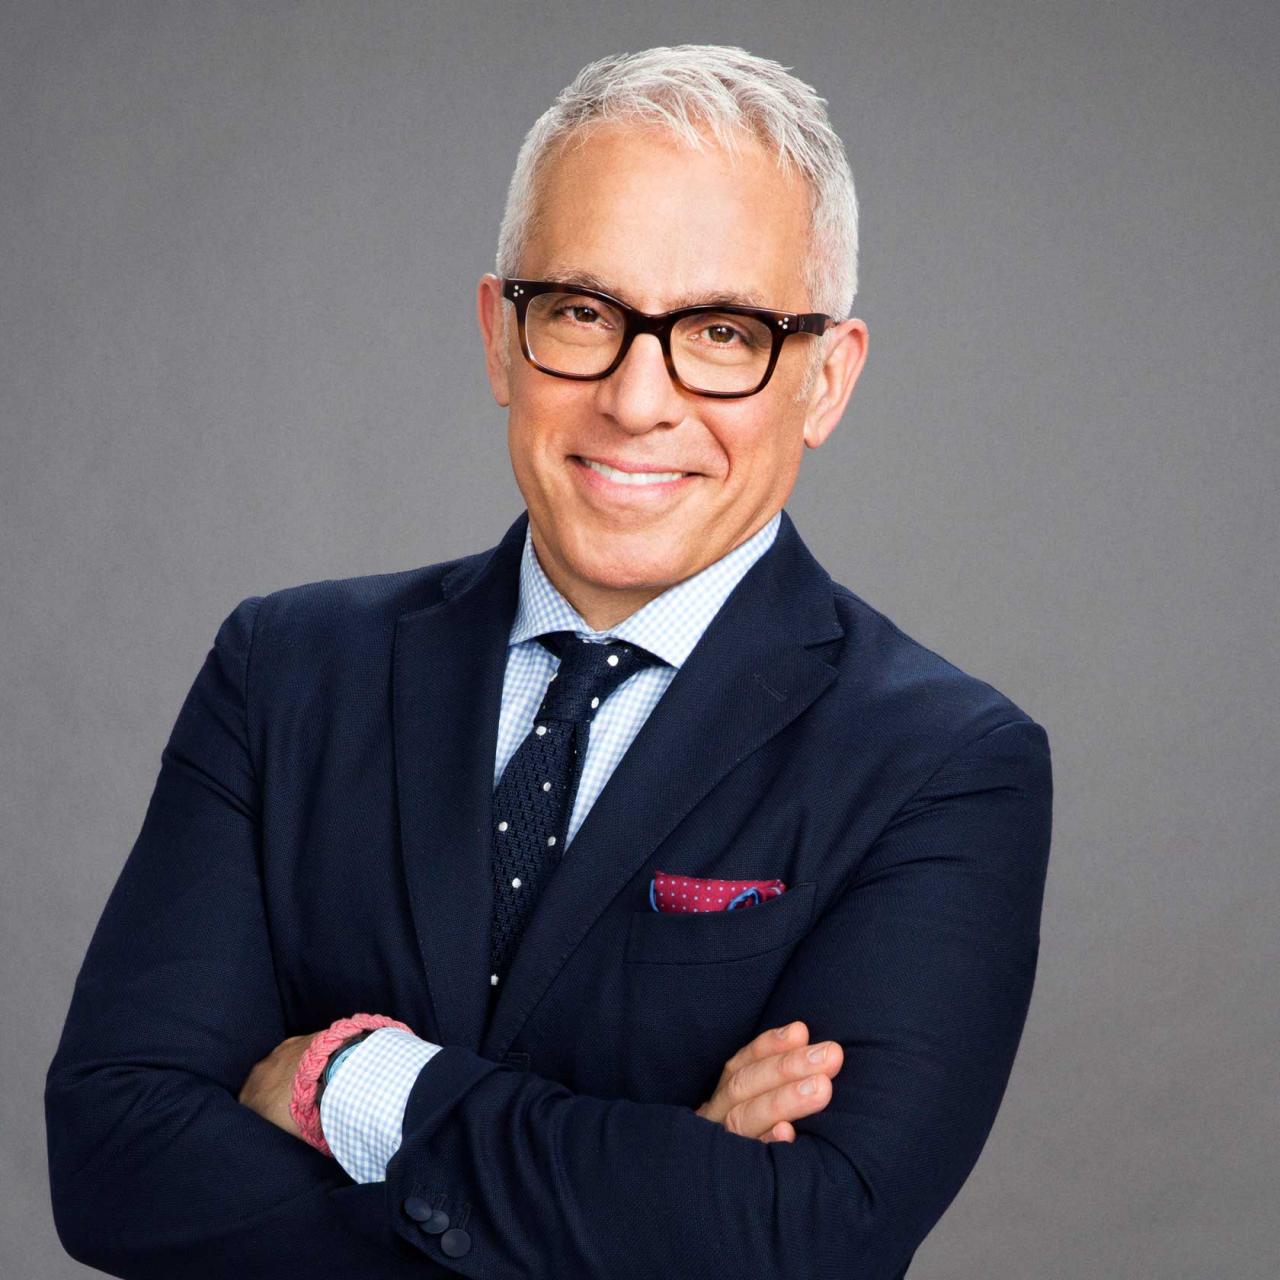 The One Food Item Geoffrey Zakarian Always Buys Store-Bought